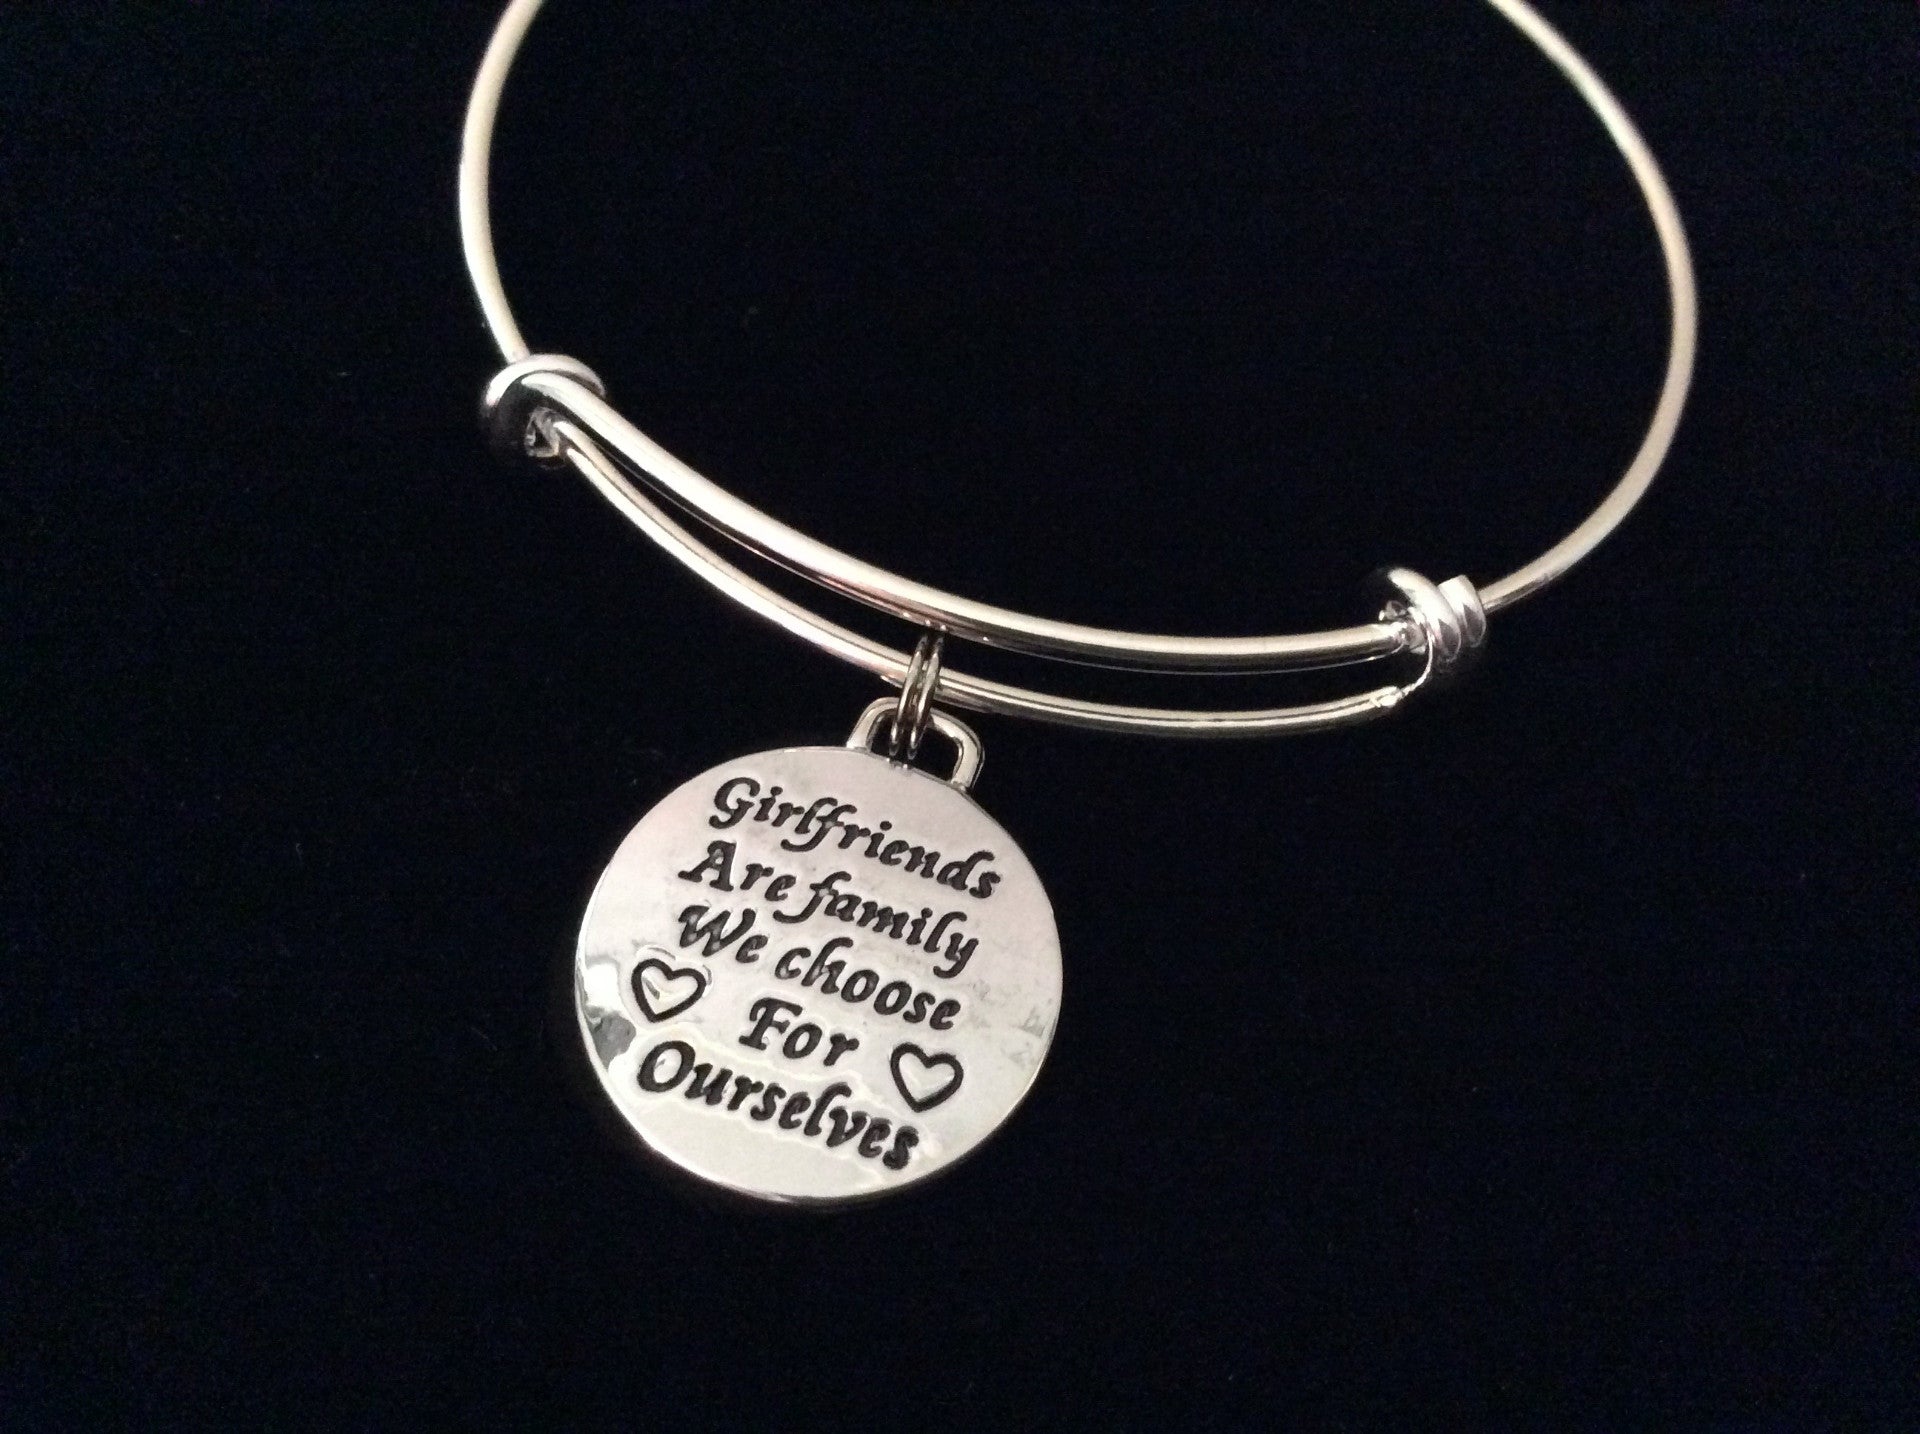 Girlfriends are family we Choose Ourselves Bracelet Adjustable Expandable Silver Plated Bangle Charm